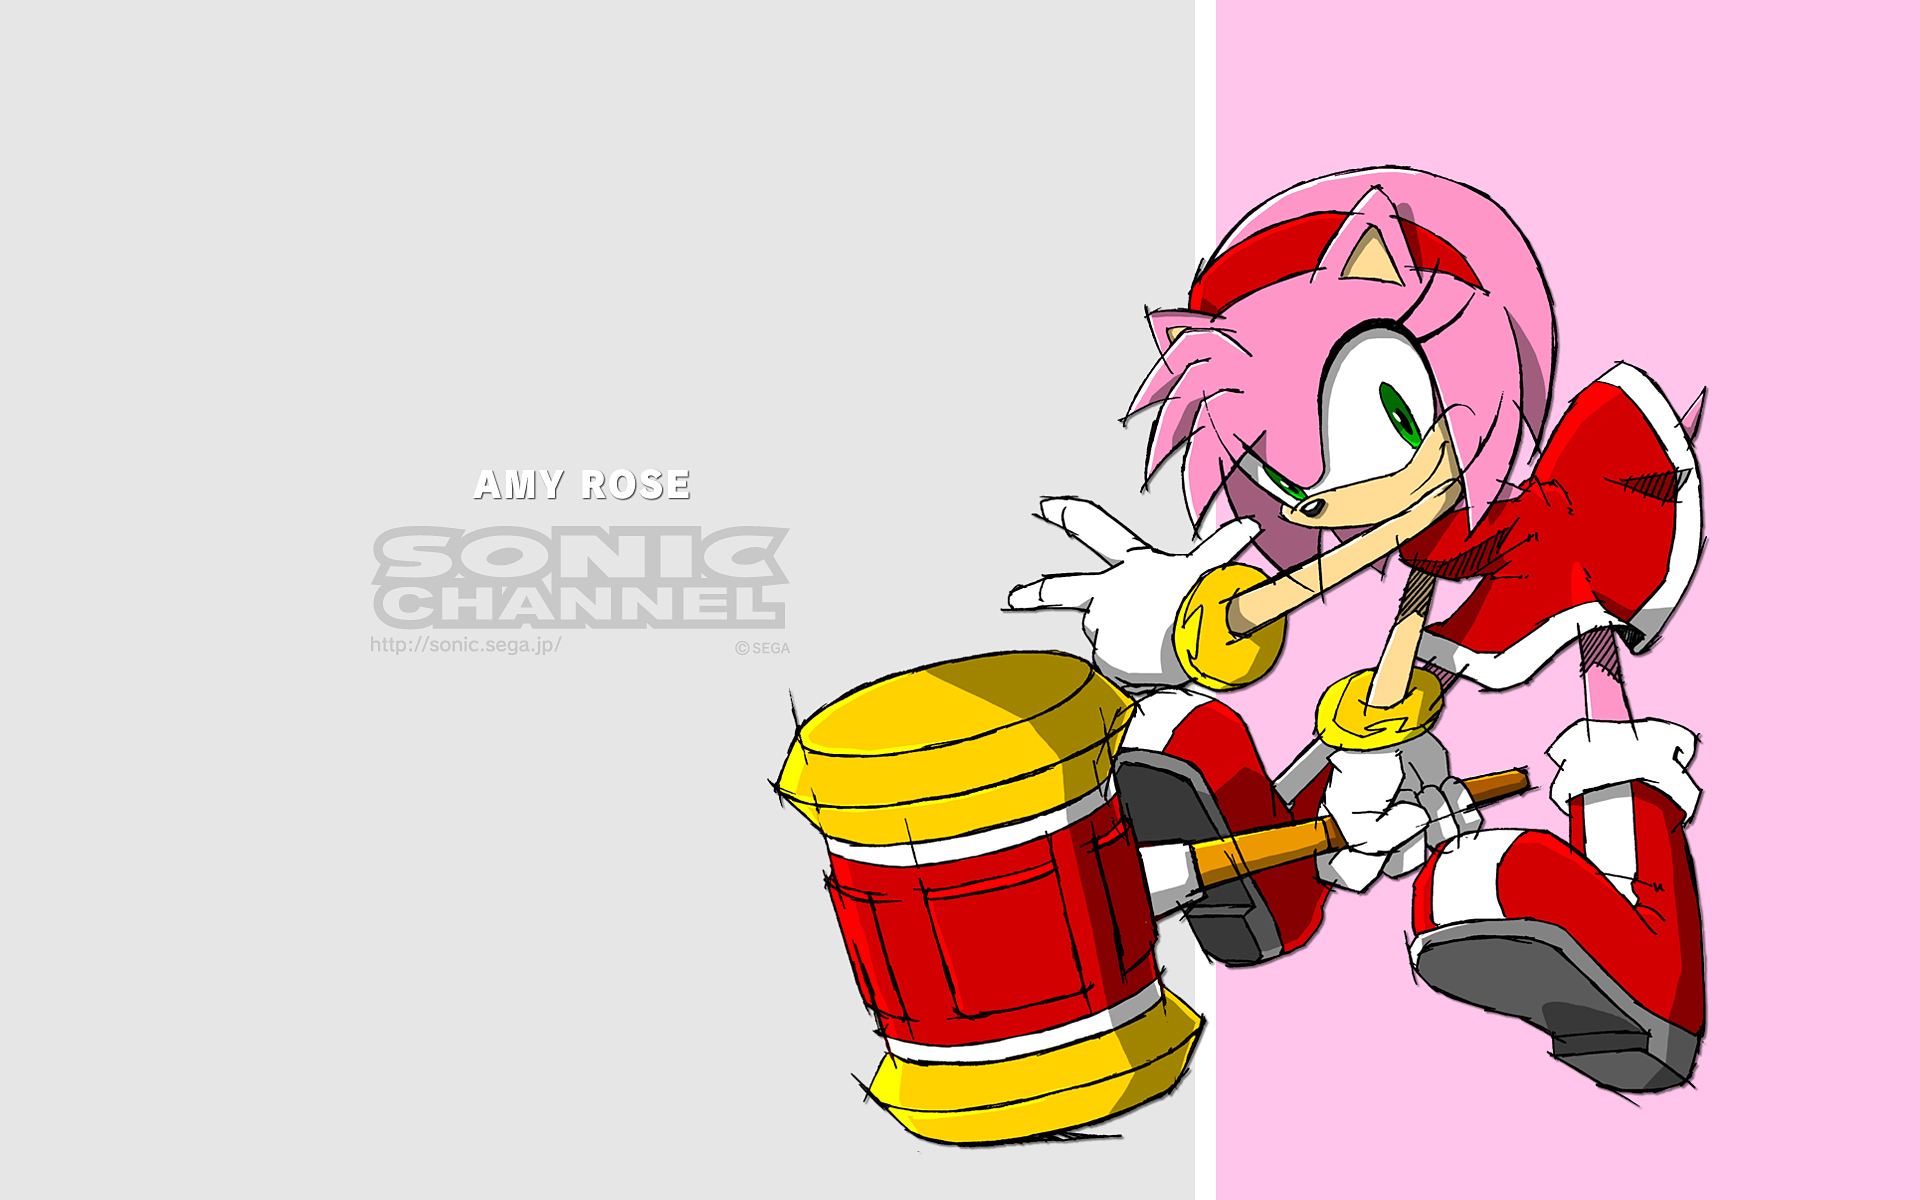 HD wallpaper Sonic Sonic the Hedgehog 2006 Amy Rose  Wallpaper Flare